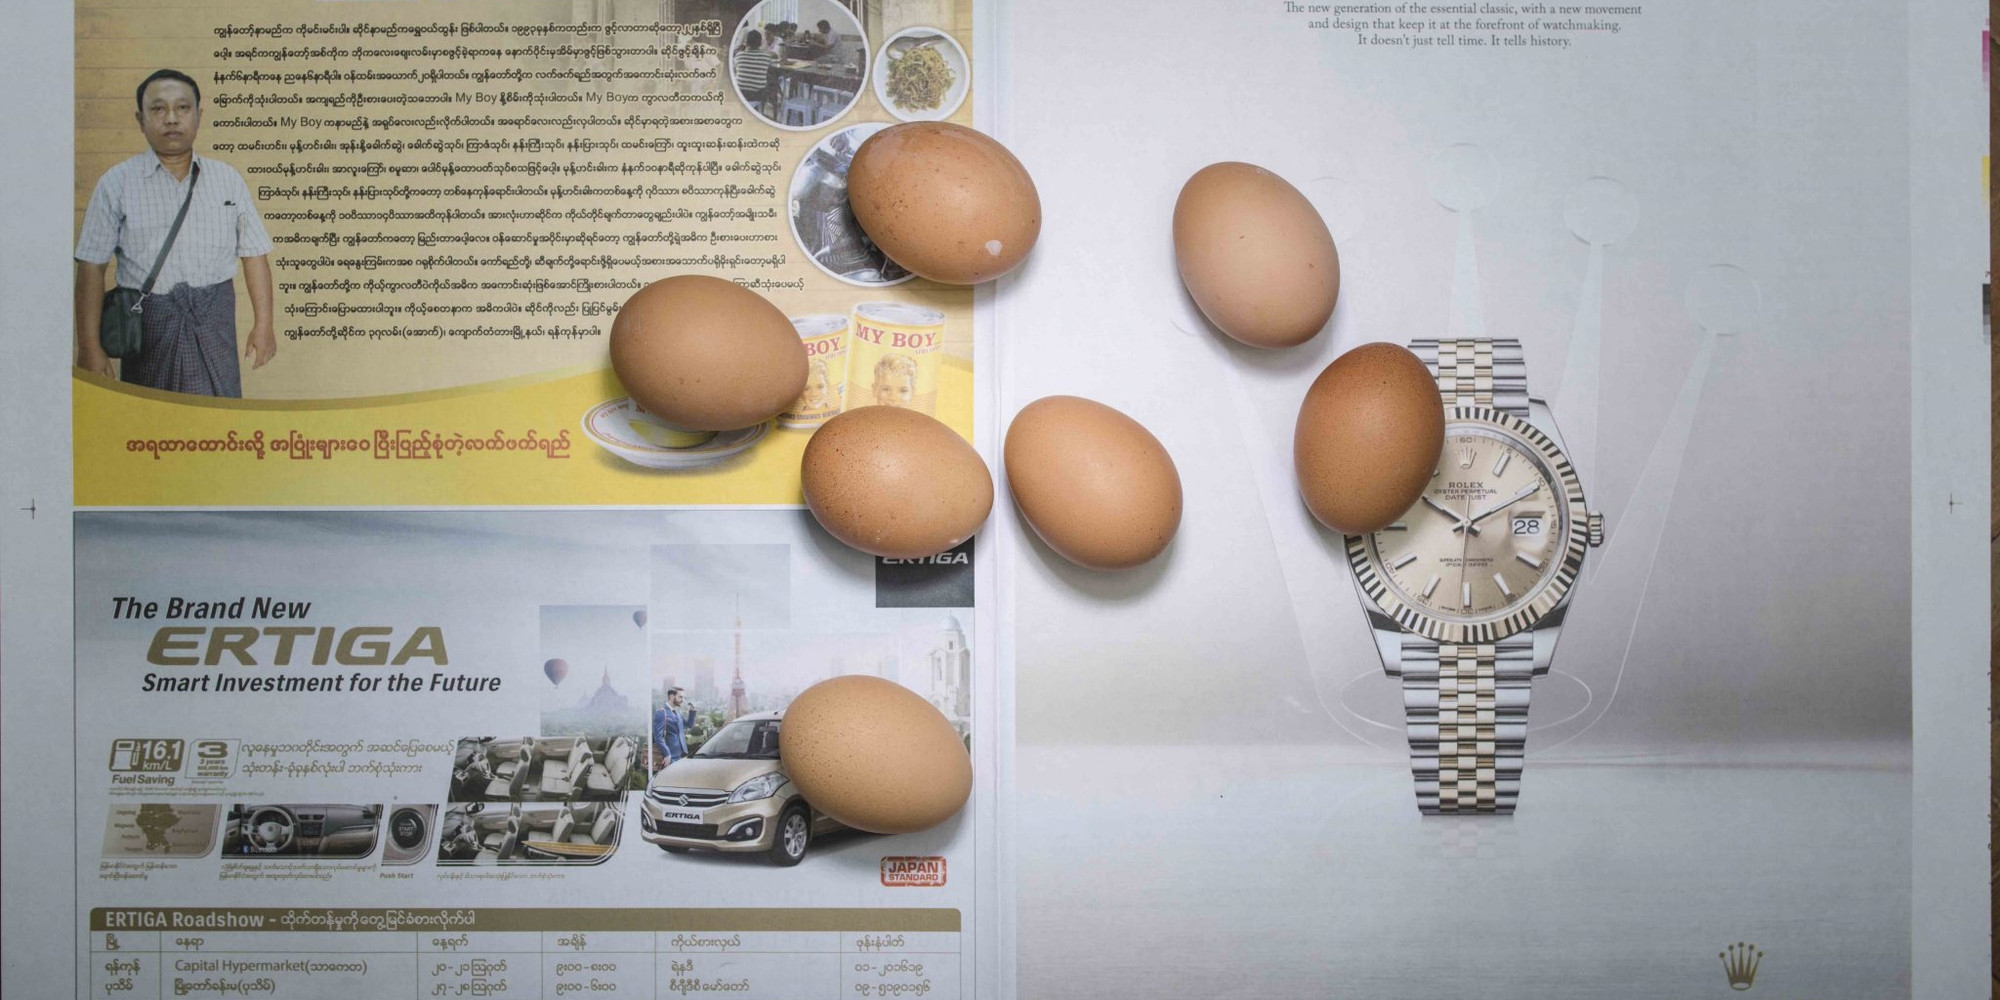 Chow and Lin (Stefen Chow, Huiyi Lin). The Poverty Line (Eggs) (Myanmar). 2010–20. Inkjet print, each: 15 9/16 × 22 13/16&#34; (39.5 × 58 cm). The Museum of Modern Art, New York. Gift of the Fund for the Twenty-first Century and Committee on Architecture and Design Funds